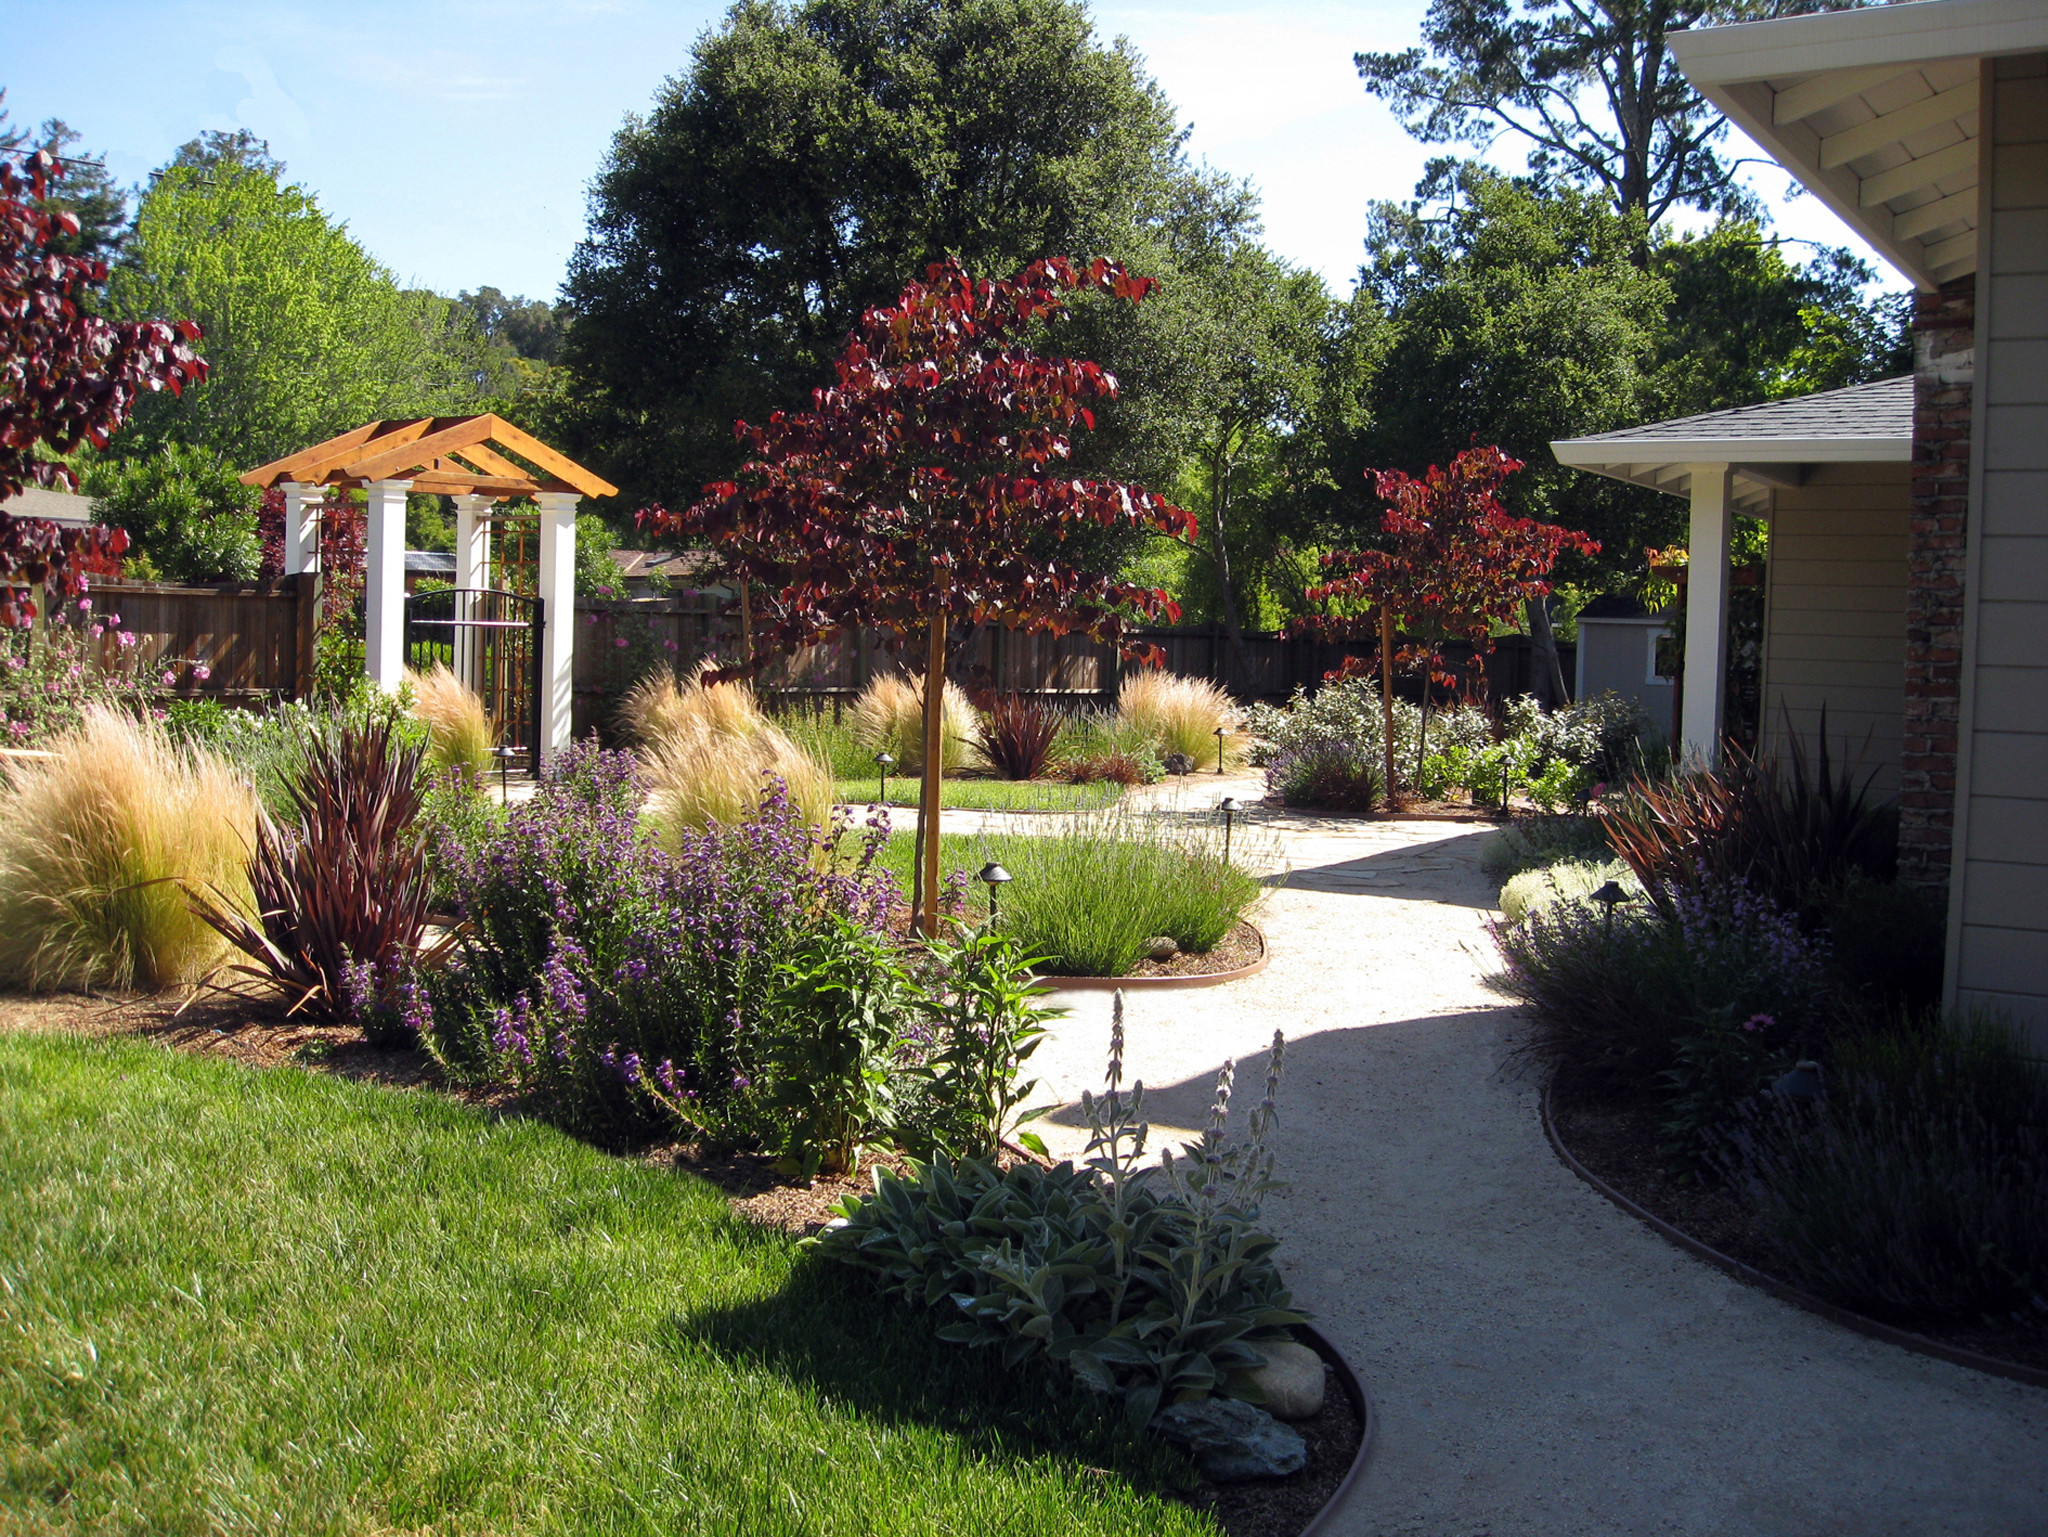 Landscape Design Images
 Some Ideas of Front Yard Landscaping for a Small Front